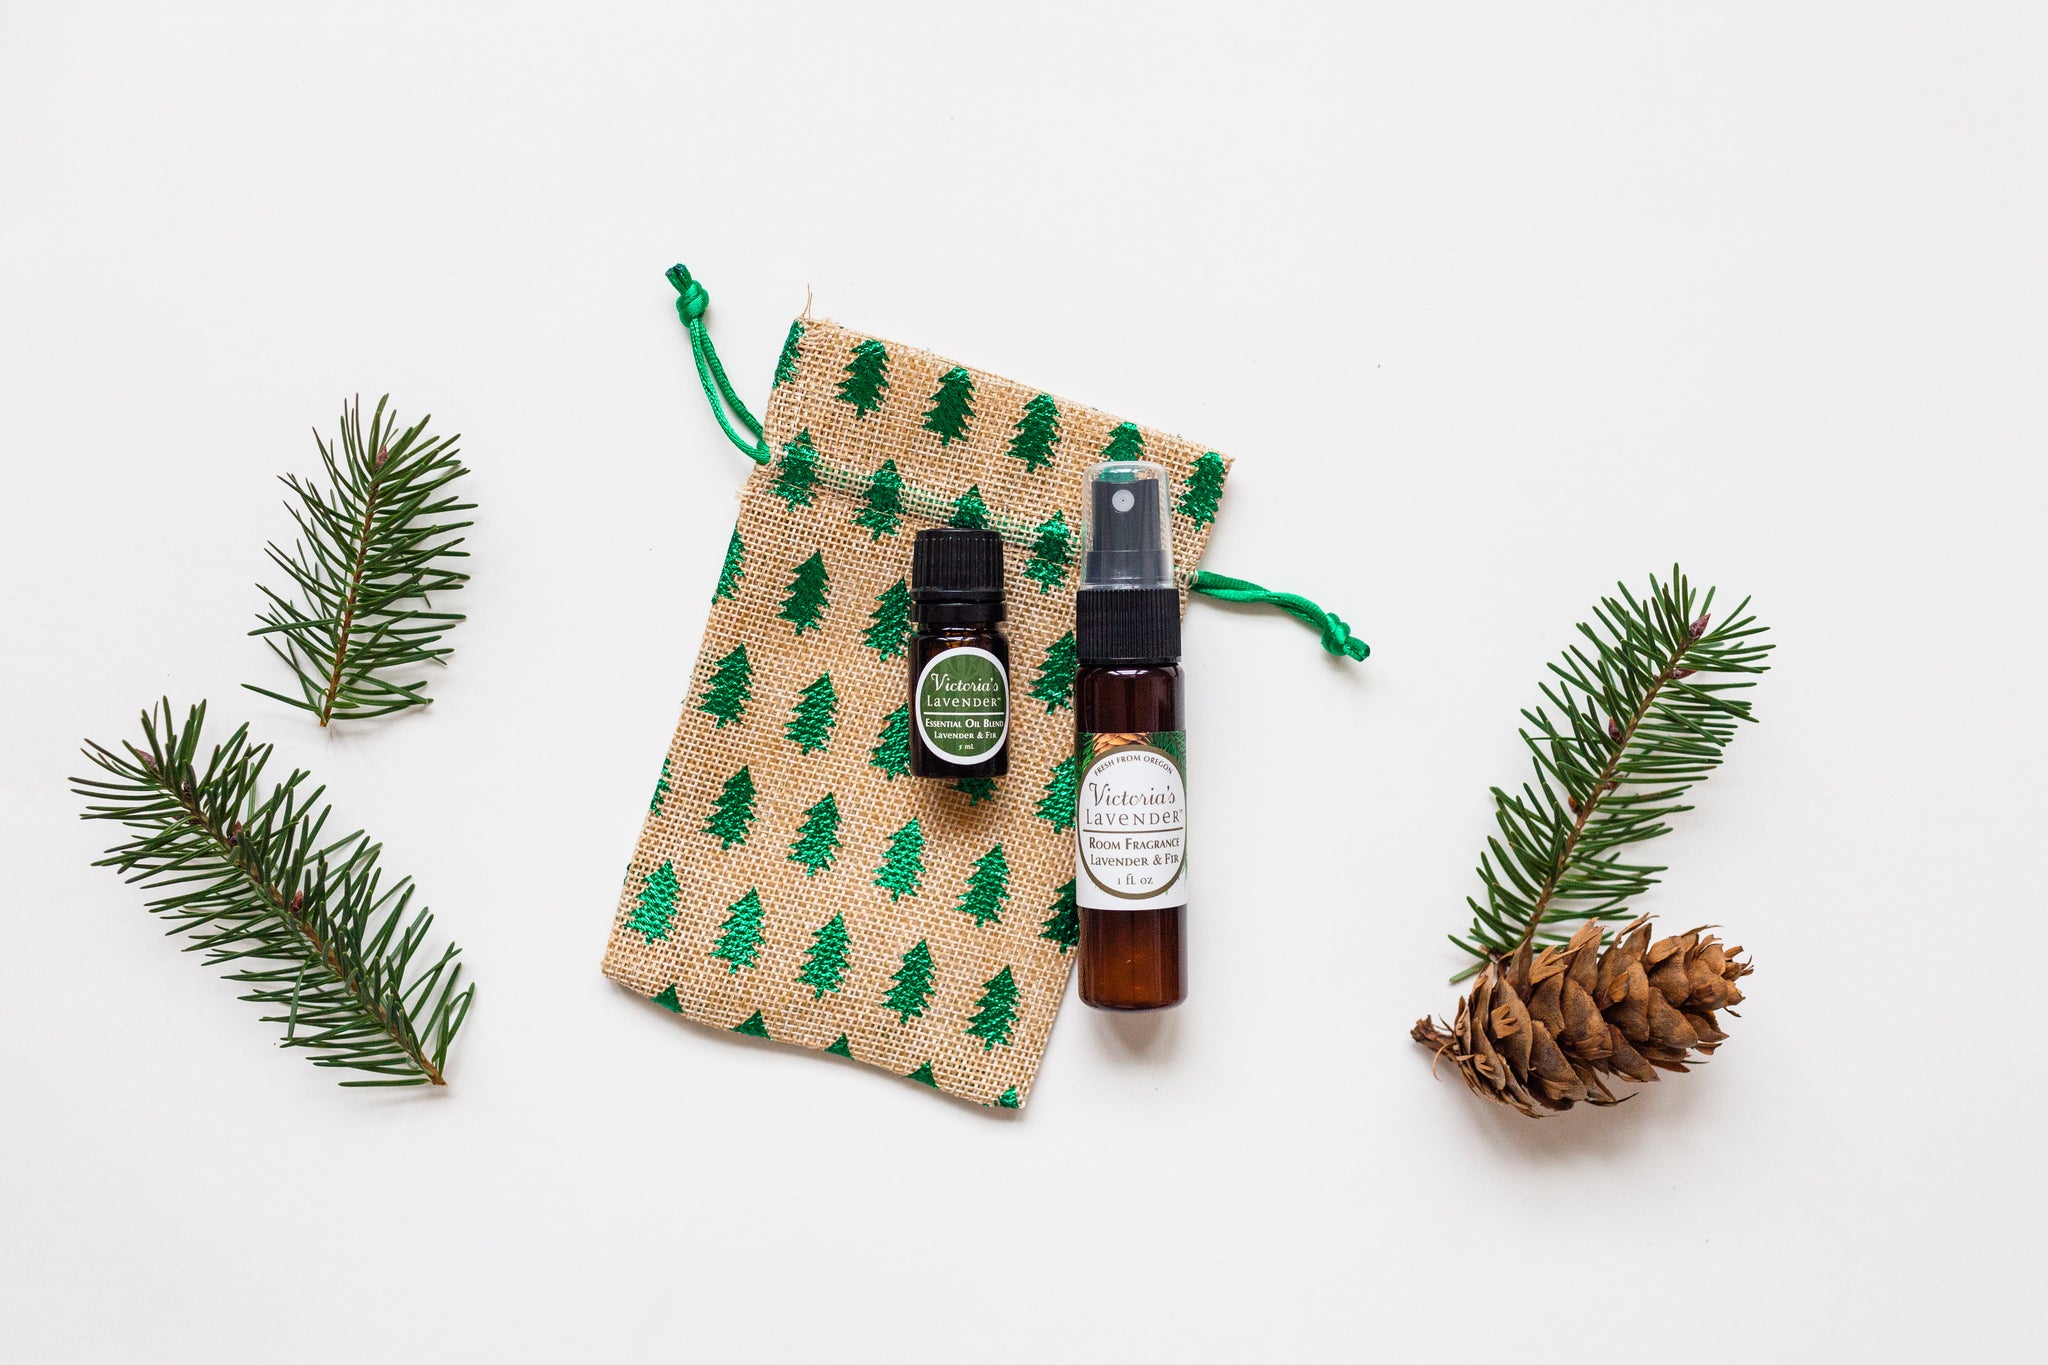 Experience the Holidays with the Lavender & Fir Holiday Line from Victoria's Lavender